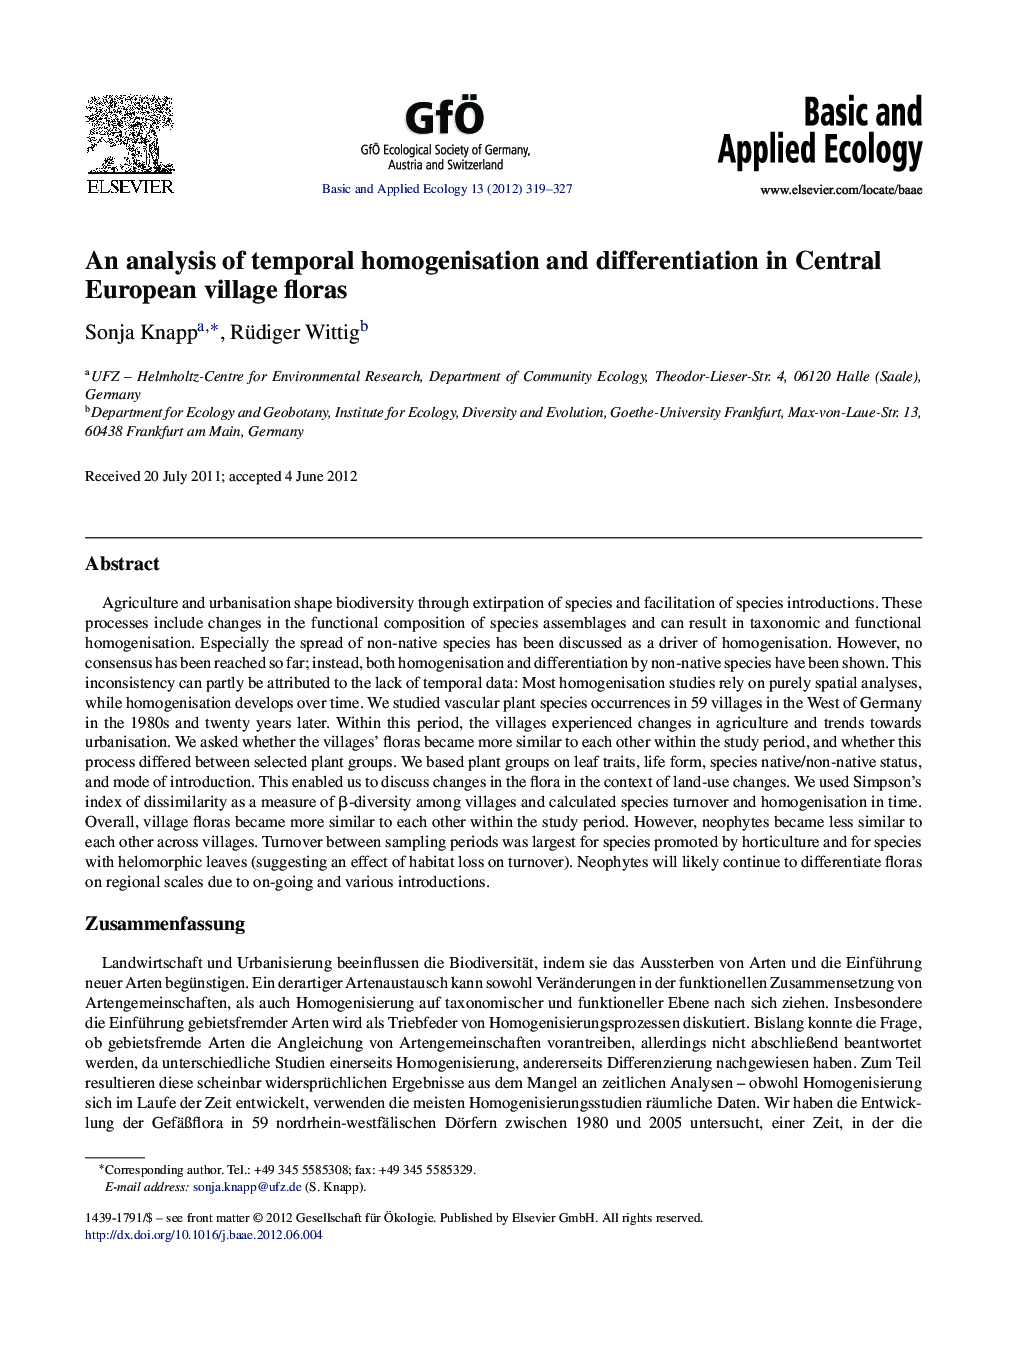 An analysis of temporal homogenisation and differentiation in Central European village floras